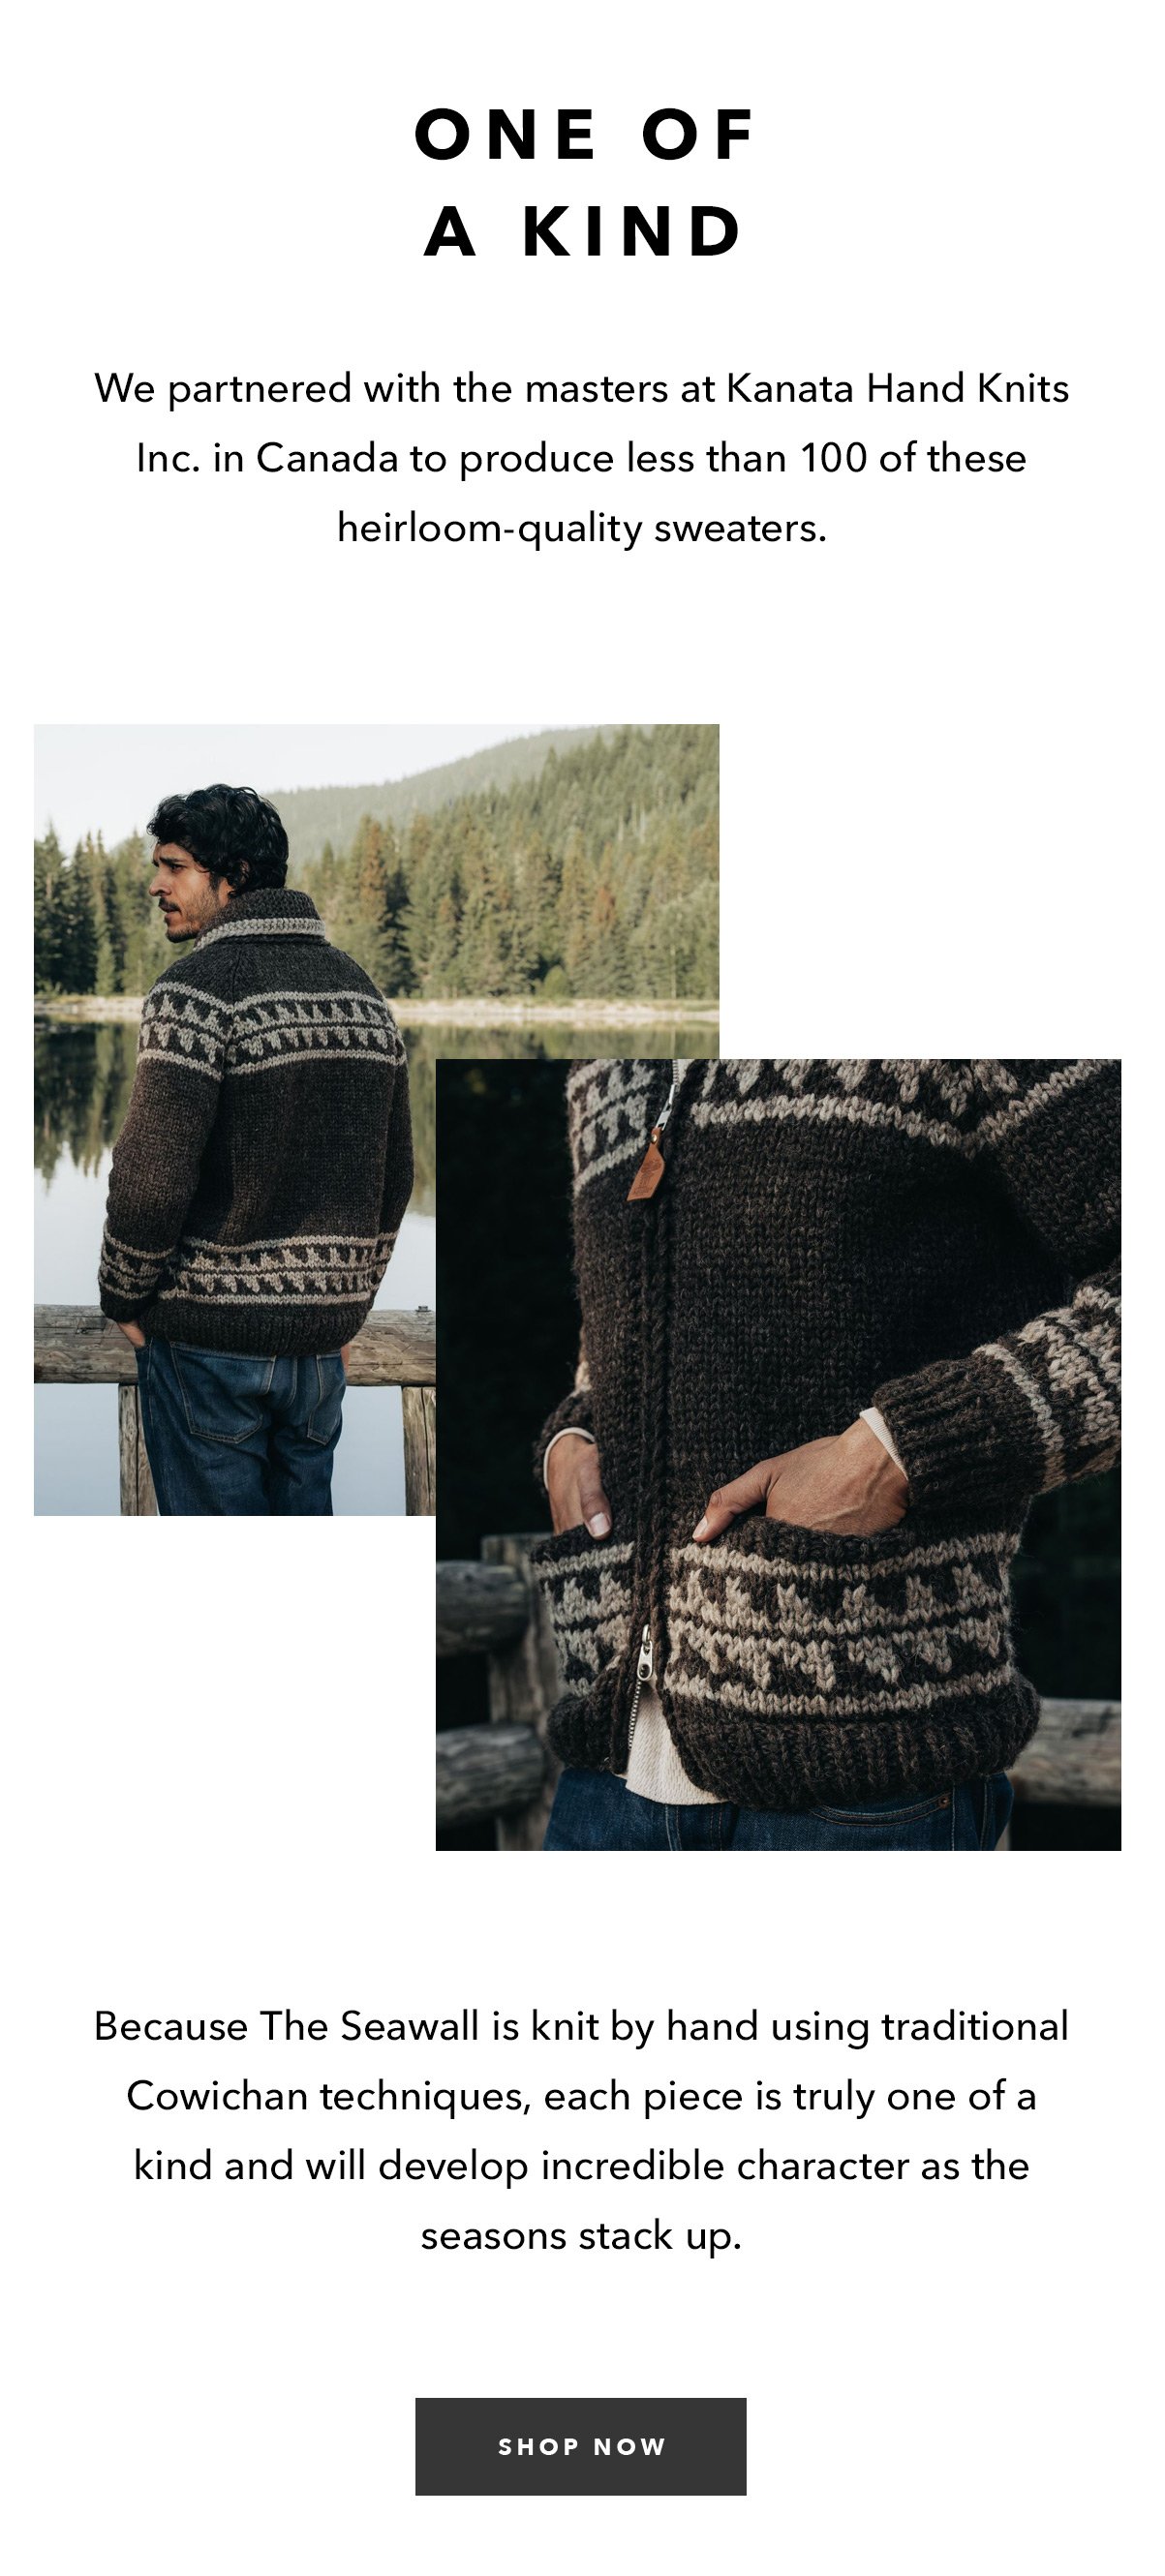 We partnered with the masters at Kanata Hand Knits Inc. in Canada to produce less than 100 of these heirloom-quality sweaters.